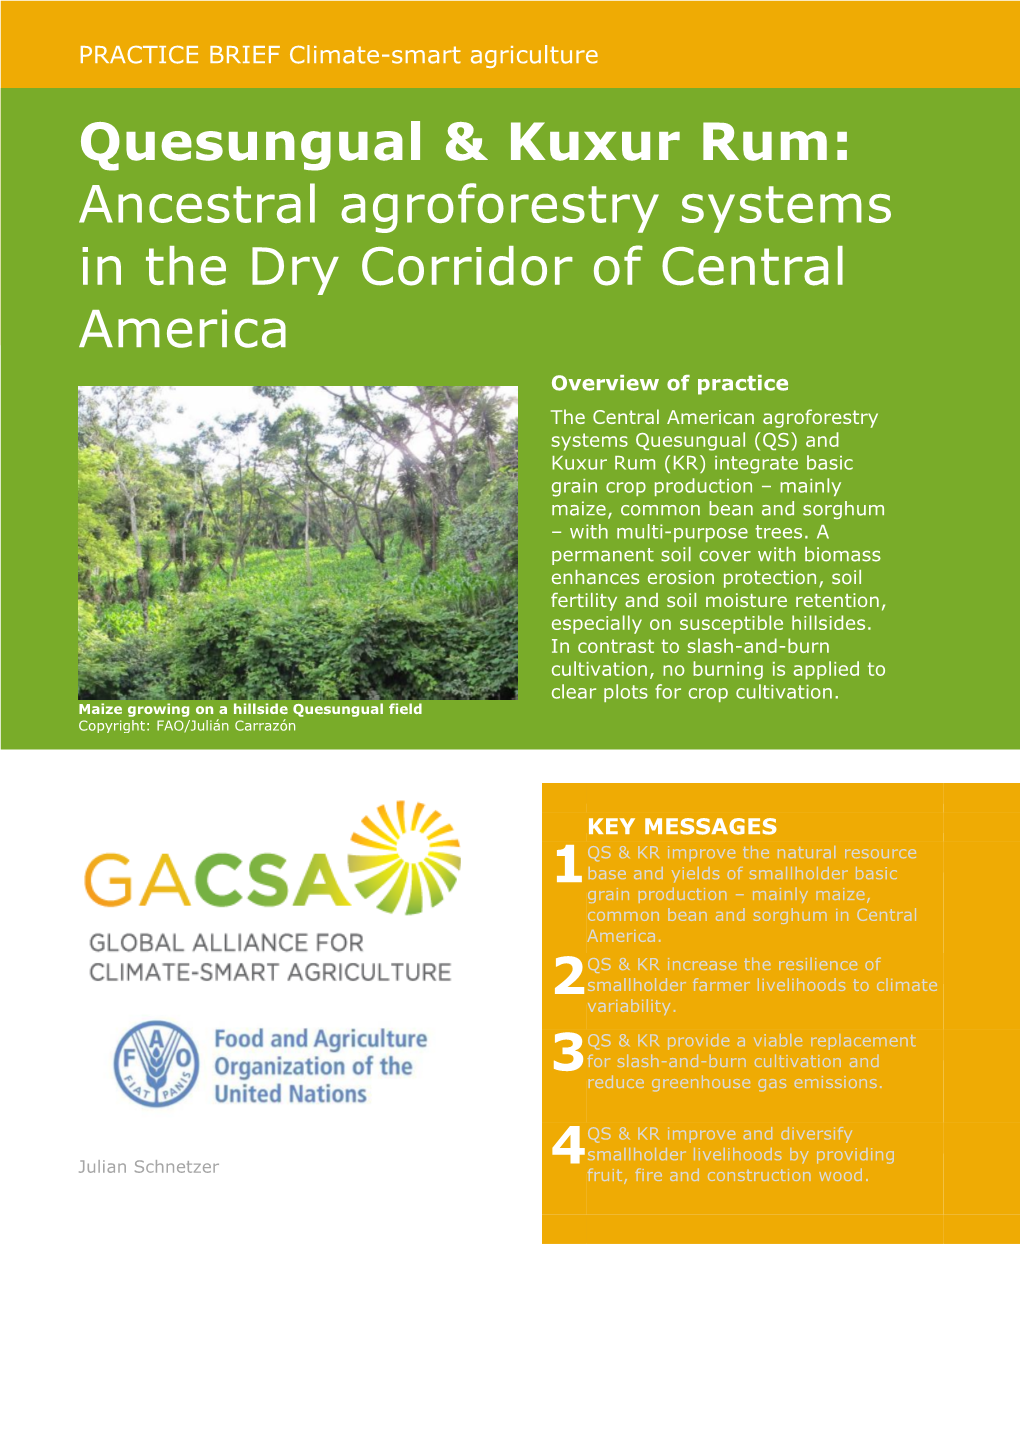 Ancestral Agroforestry Systems in the Dry Corridor of Central America